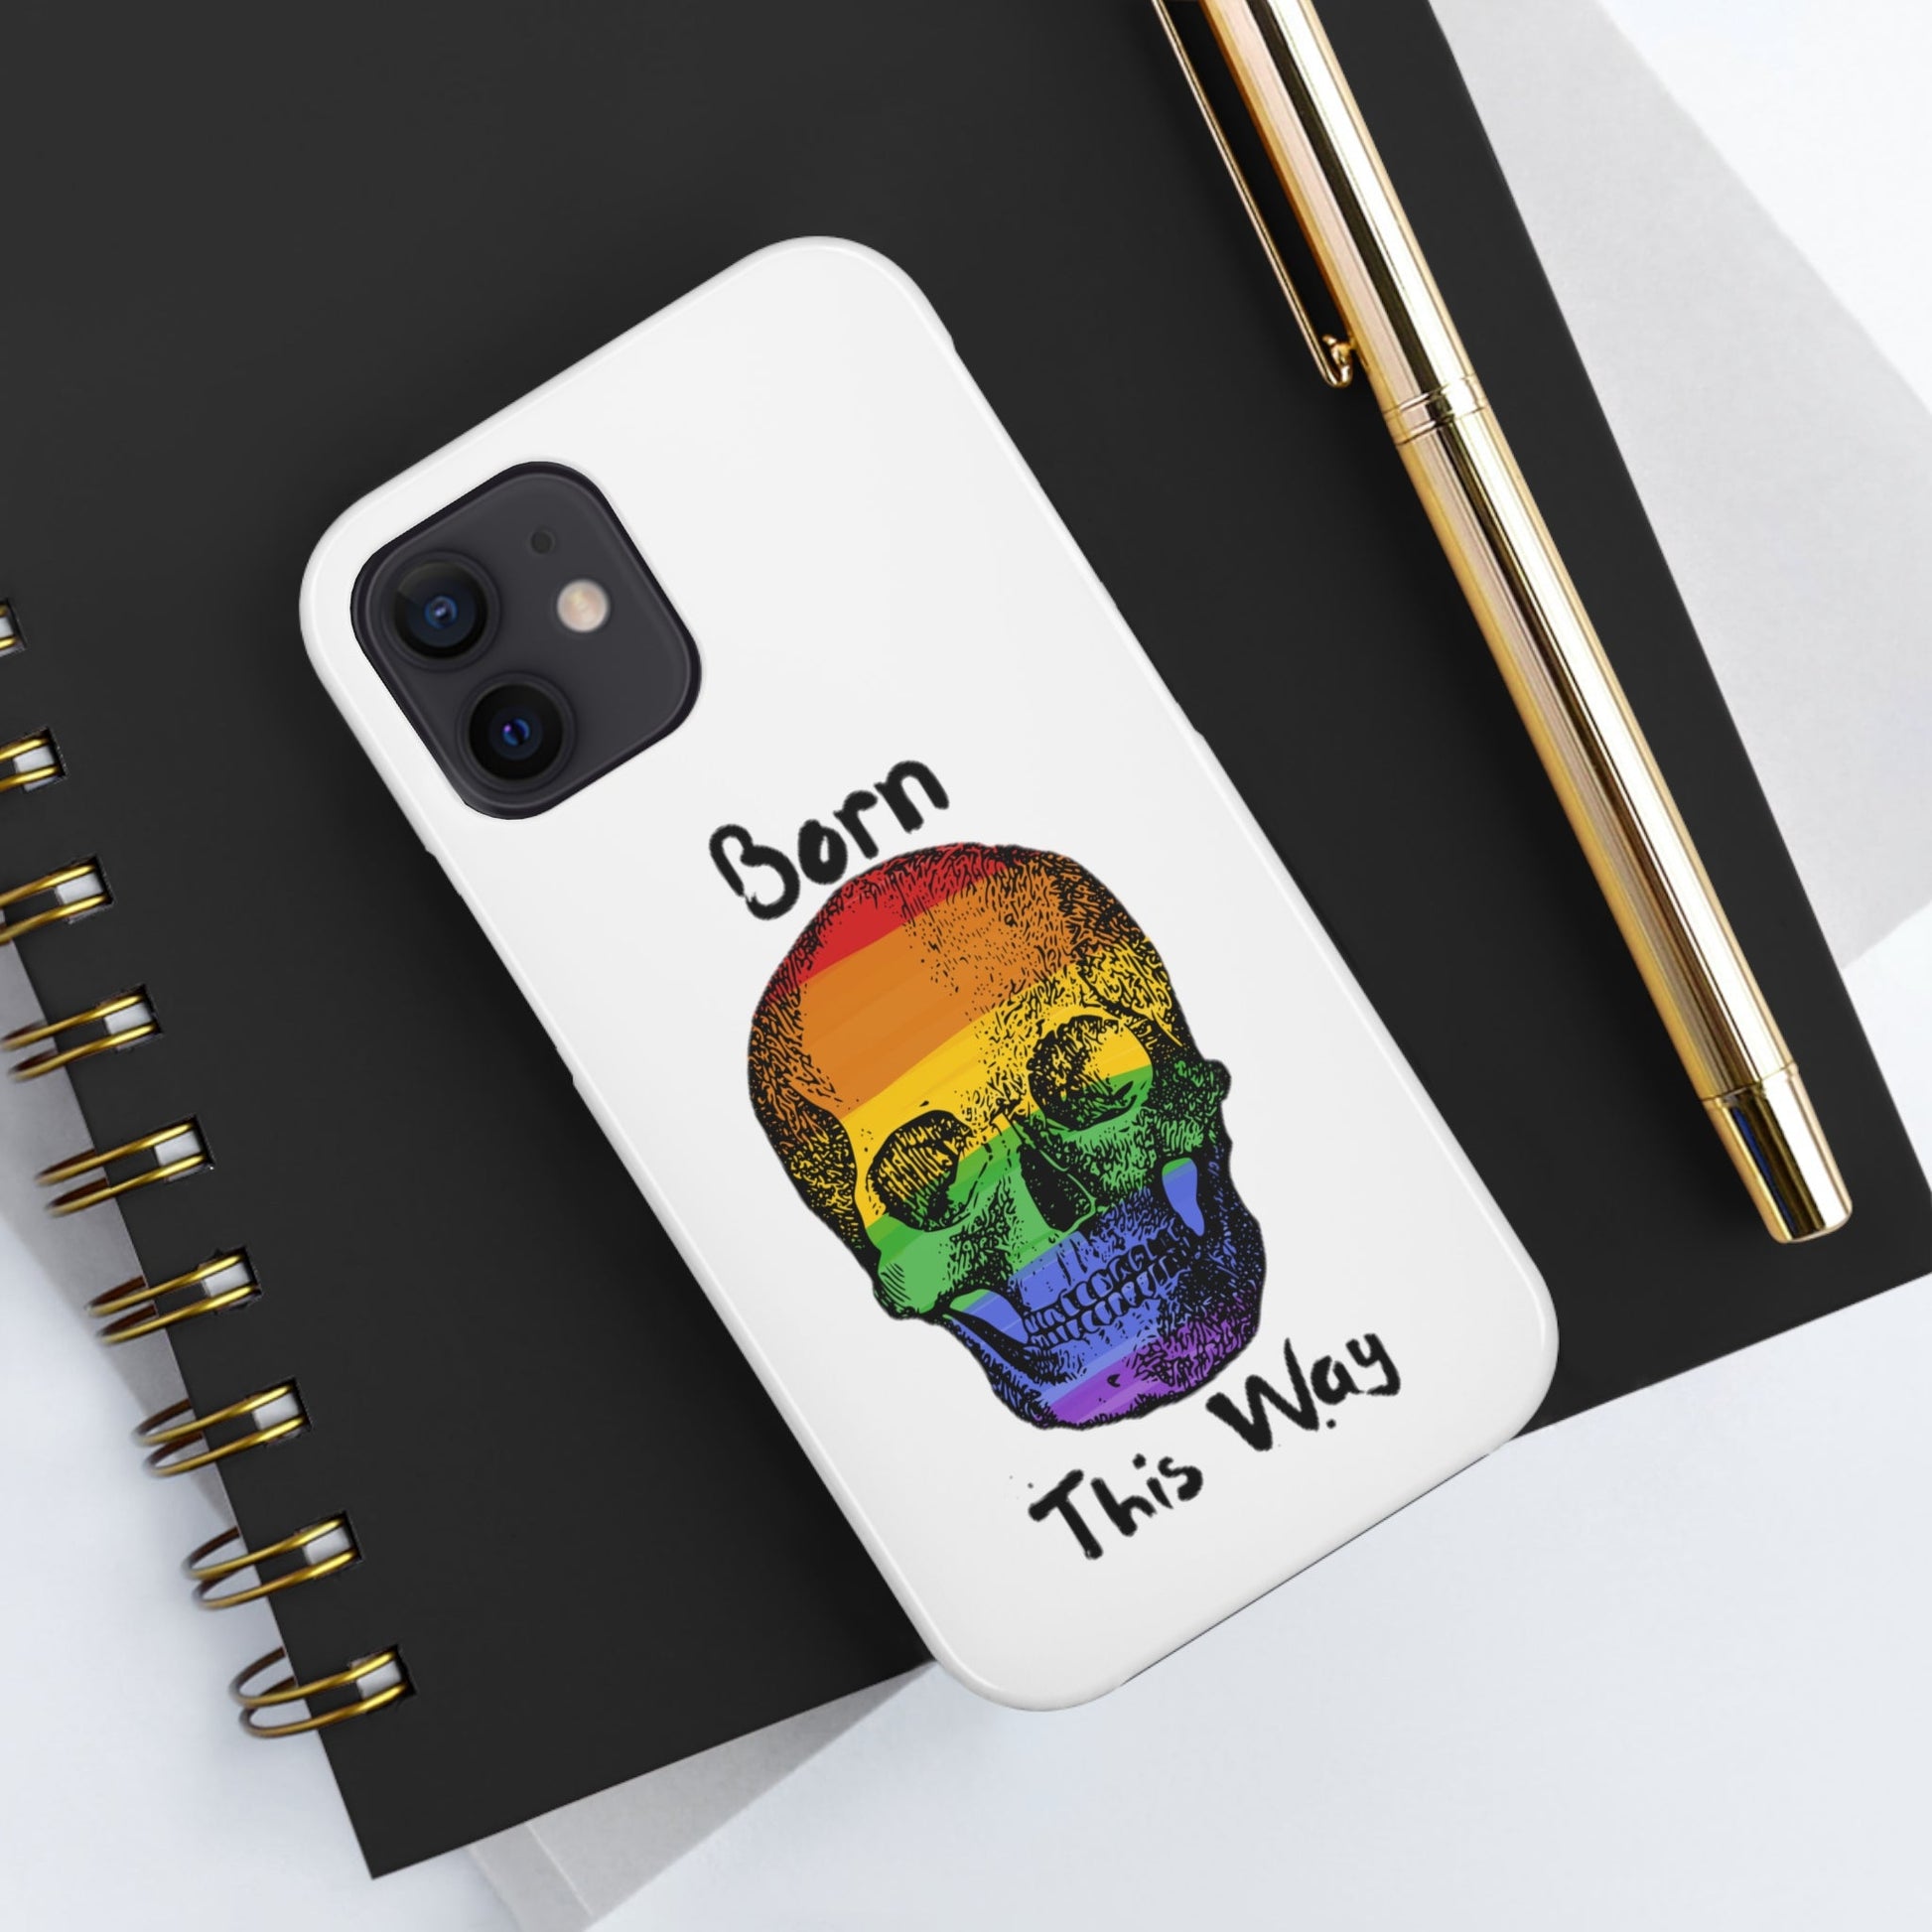 Born This Way Skeleton Pride Tough Phone Cases for iPhone 7, 8, X, 11, 12, 13, 14 and morePhone CaseVTZdesignsiPhone 12 MiniAccessoriesGlossyiPhone Cases